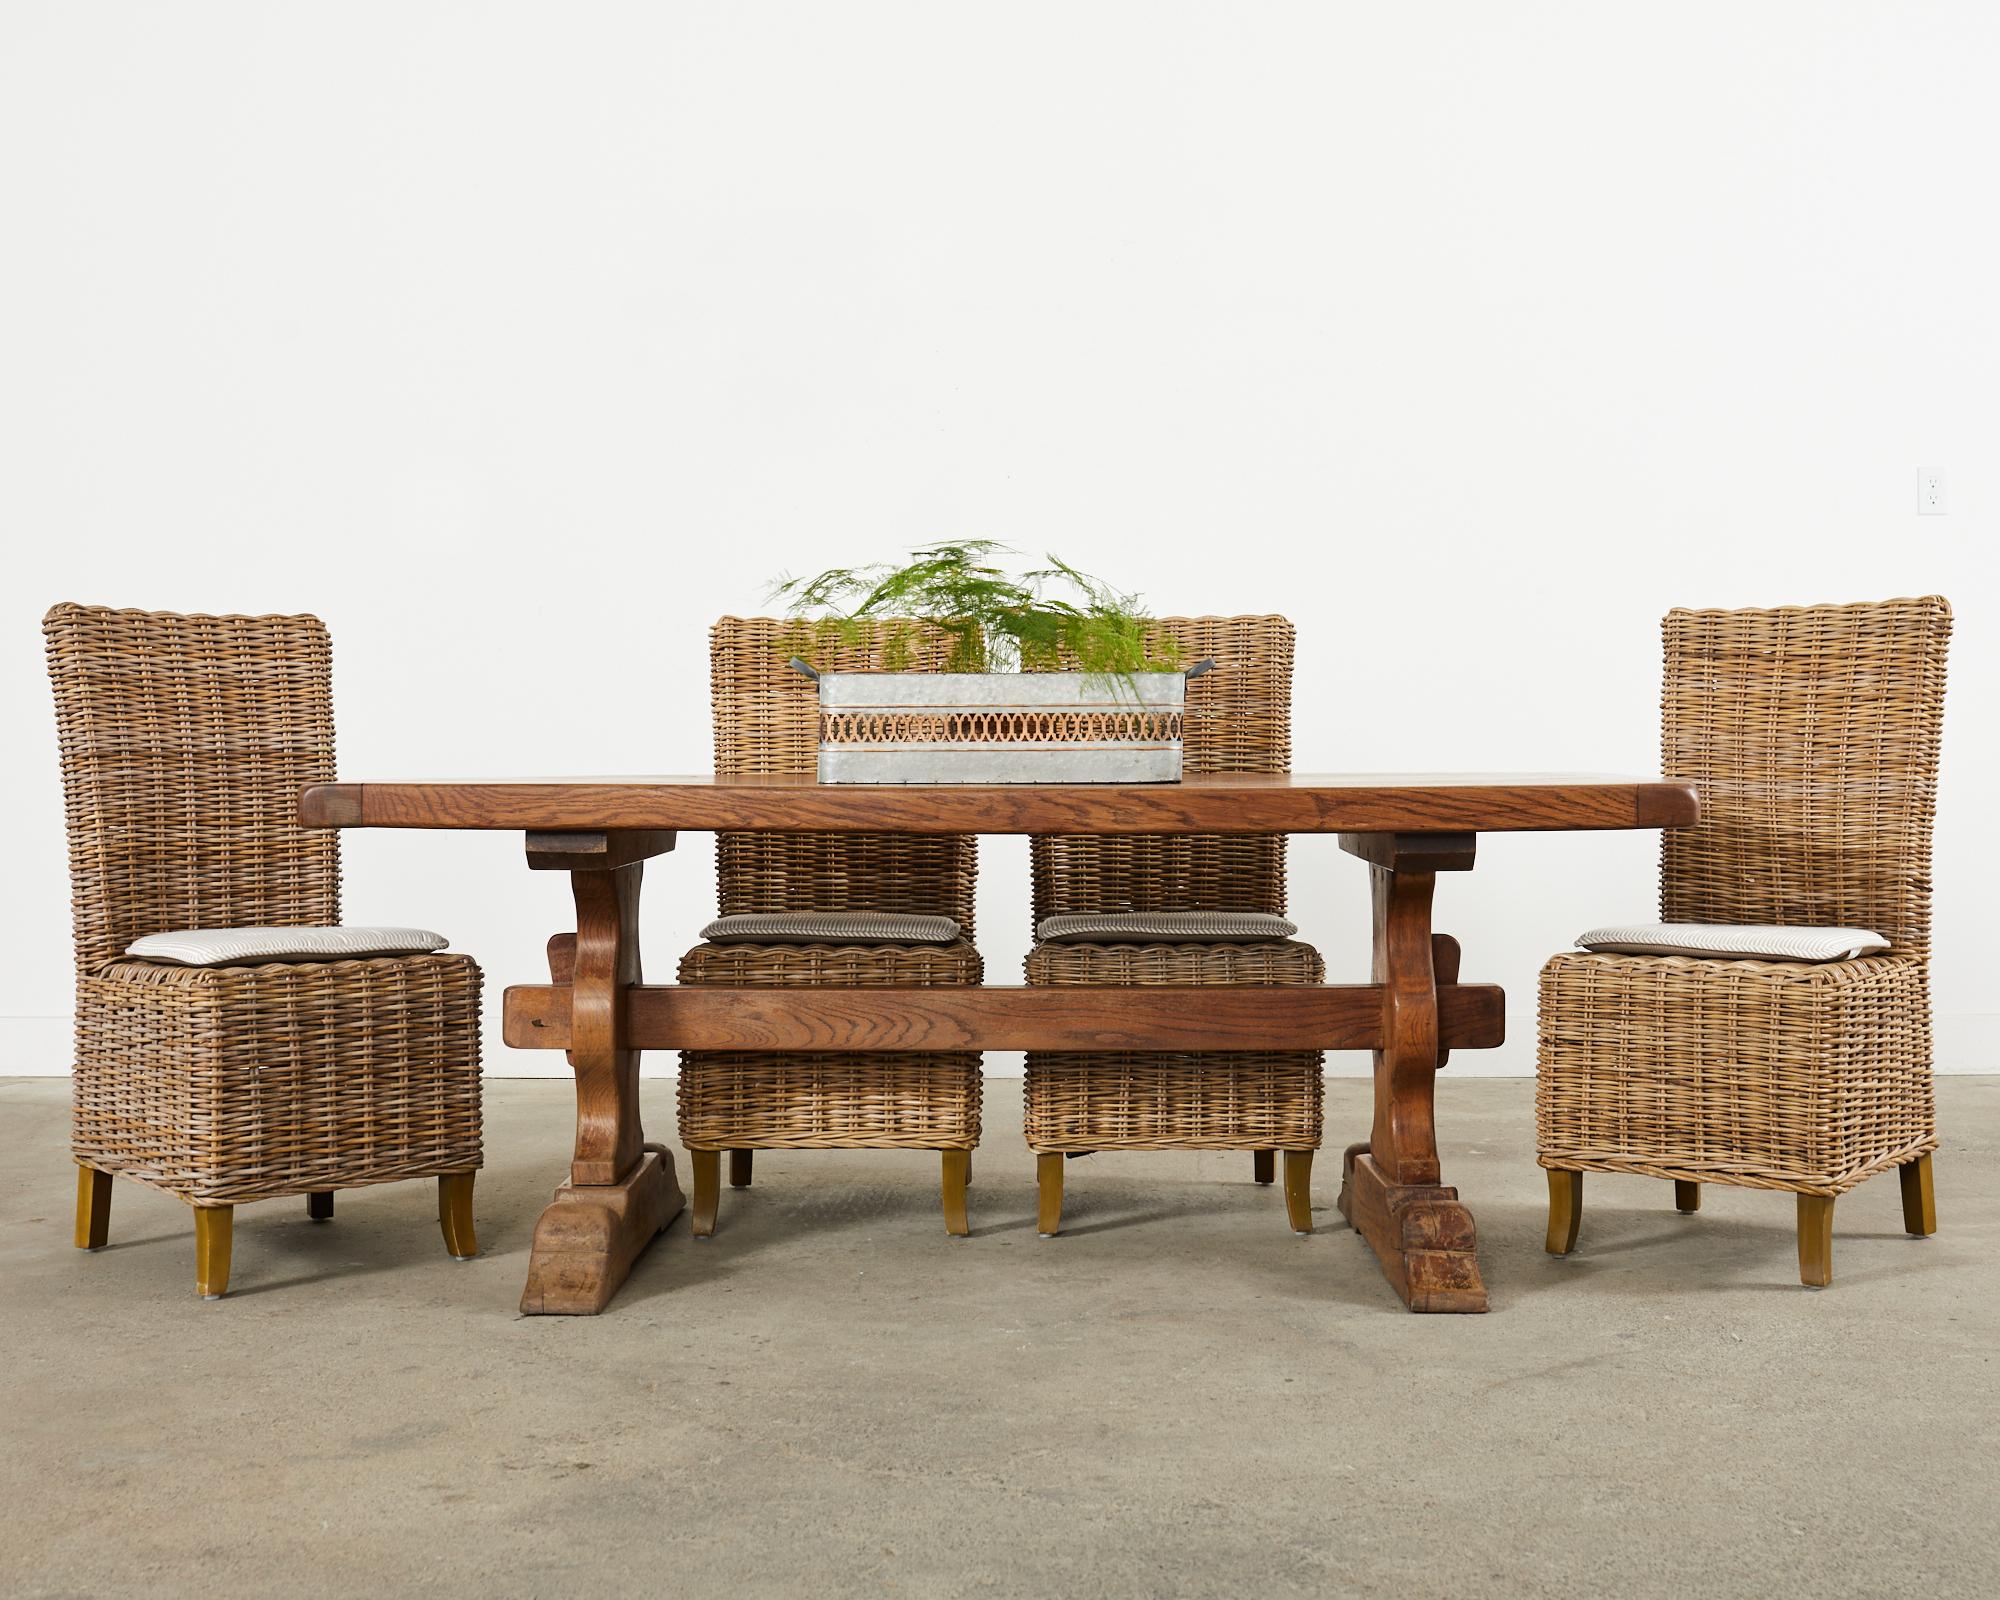 Large set of ten woven rattan wicker dining chairs made in the California coastal organic modern style. The chairs feature wooden frames with a tall square high back in a parsons chair style. The frame is covered with woven rattan wicker or stick